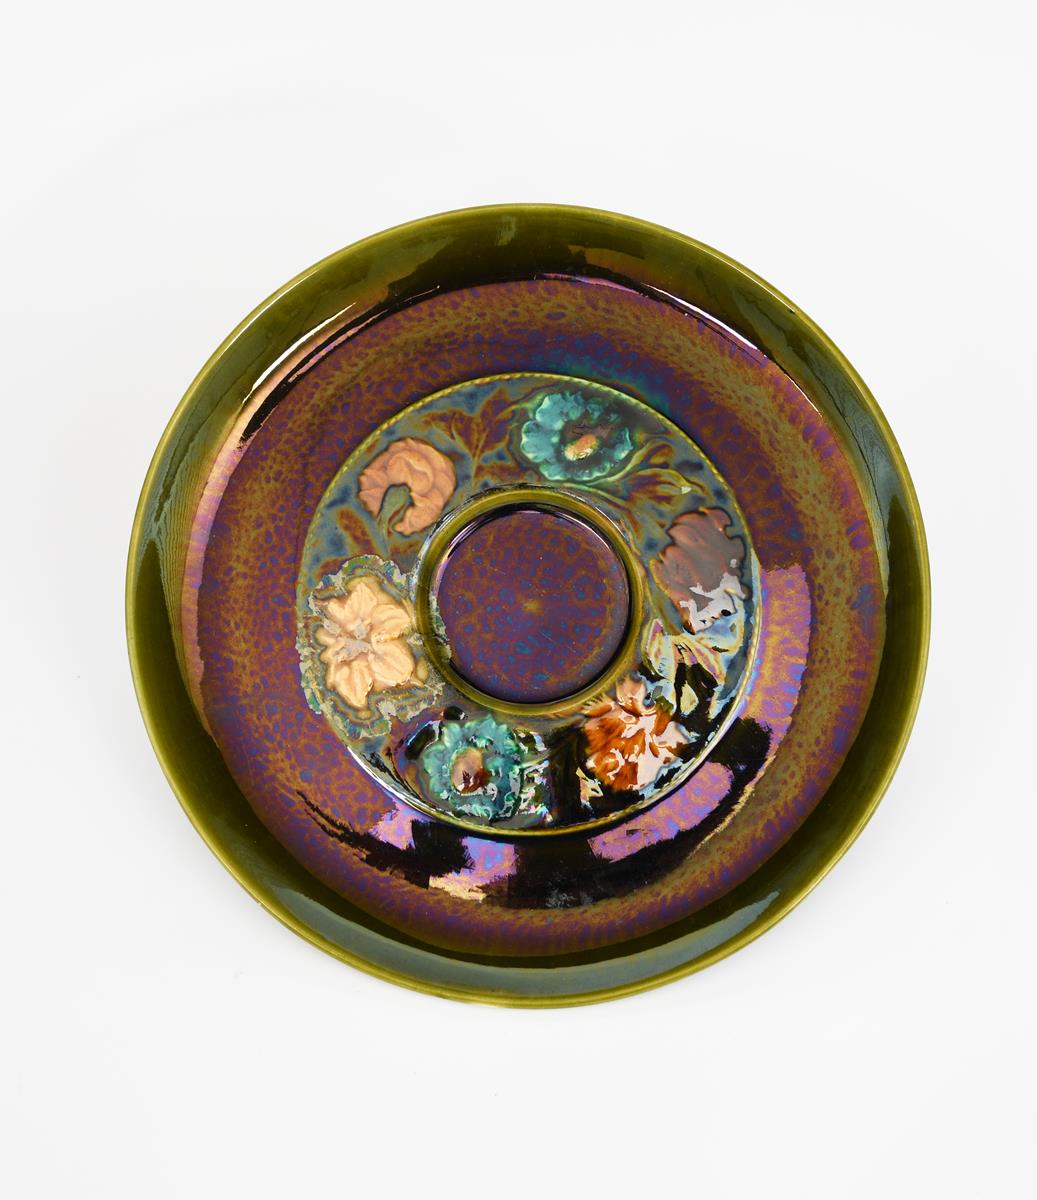 A Linthorpe Pottery plate designed by Dr Christopher Dresser, model no.299, circular, the well